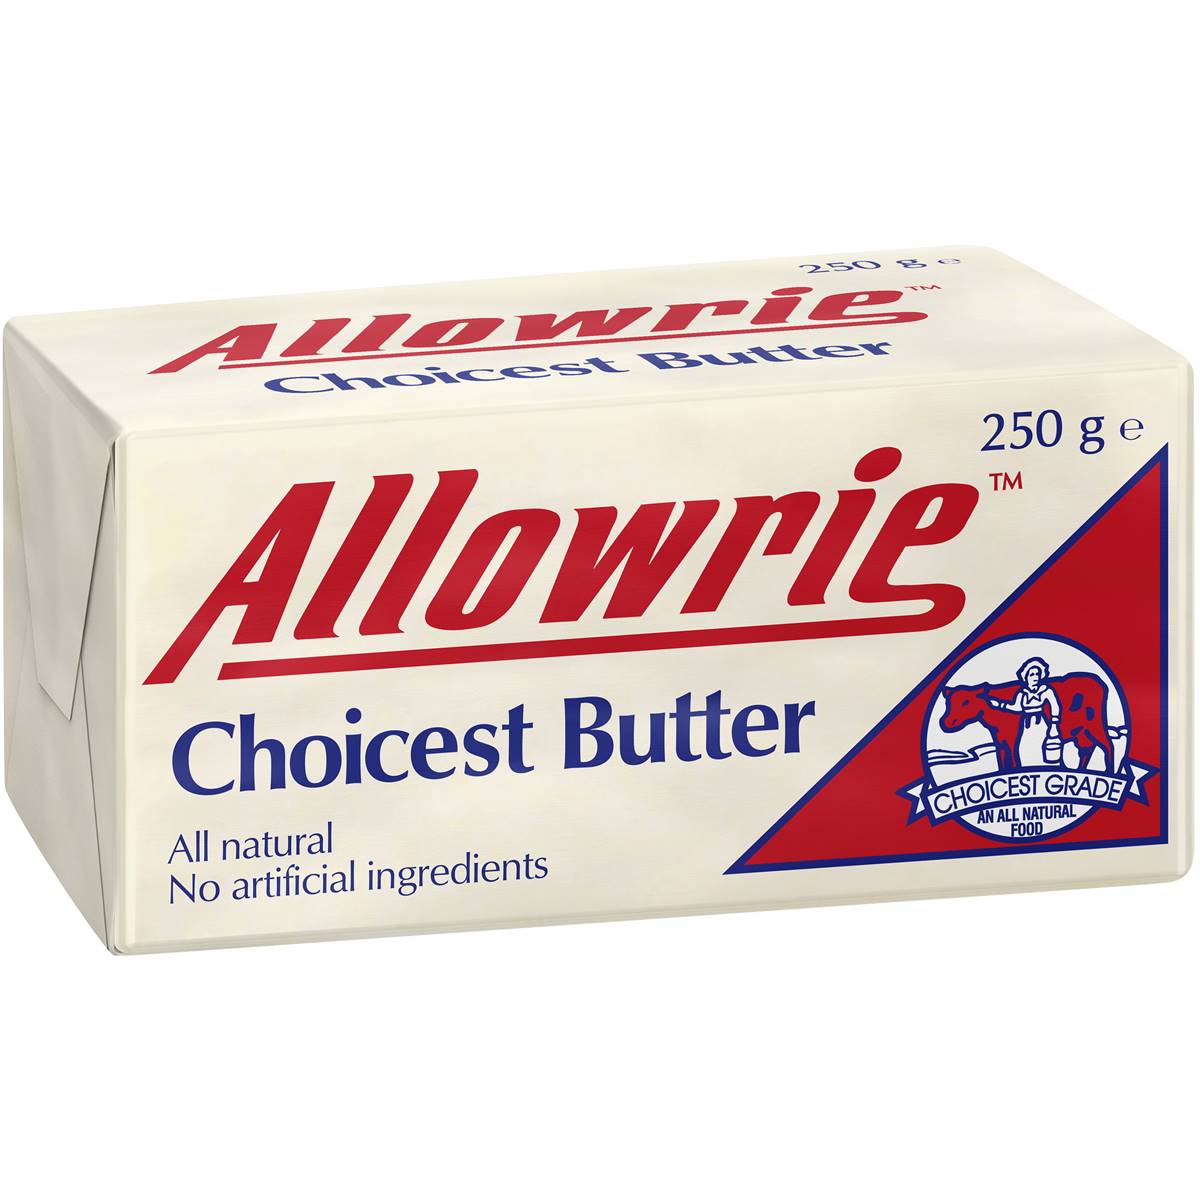 Calories in Allowrie Butter